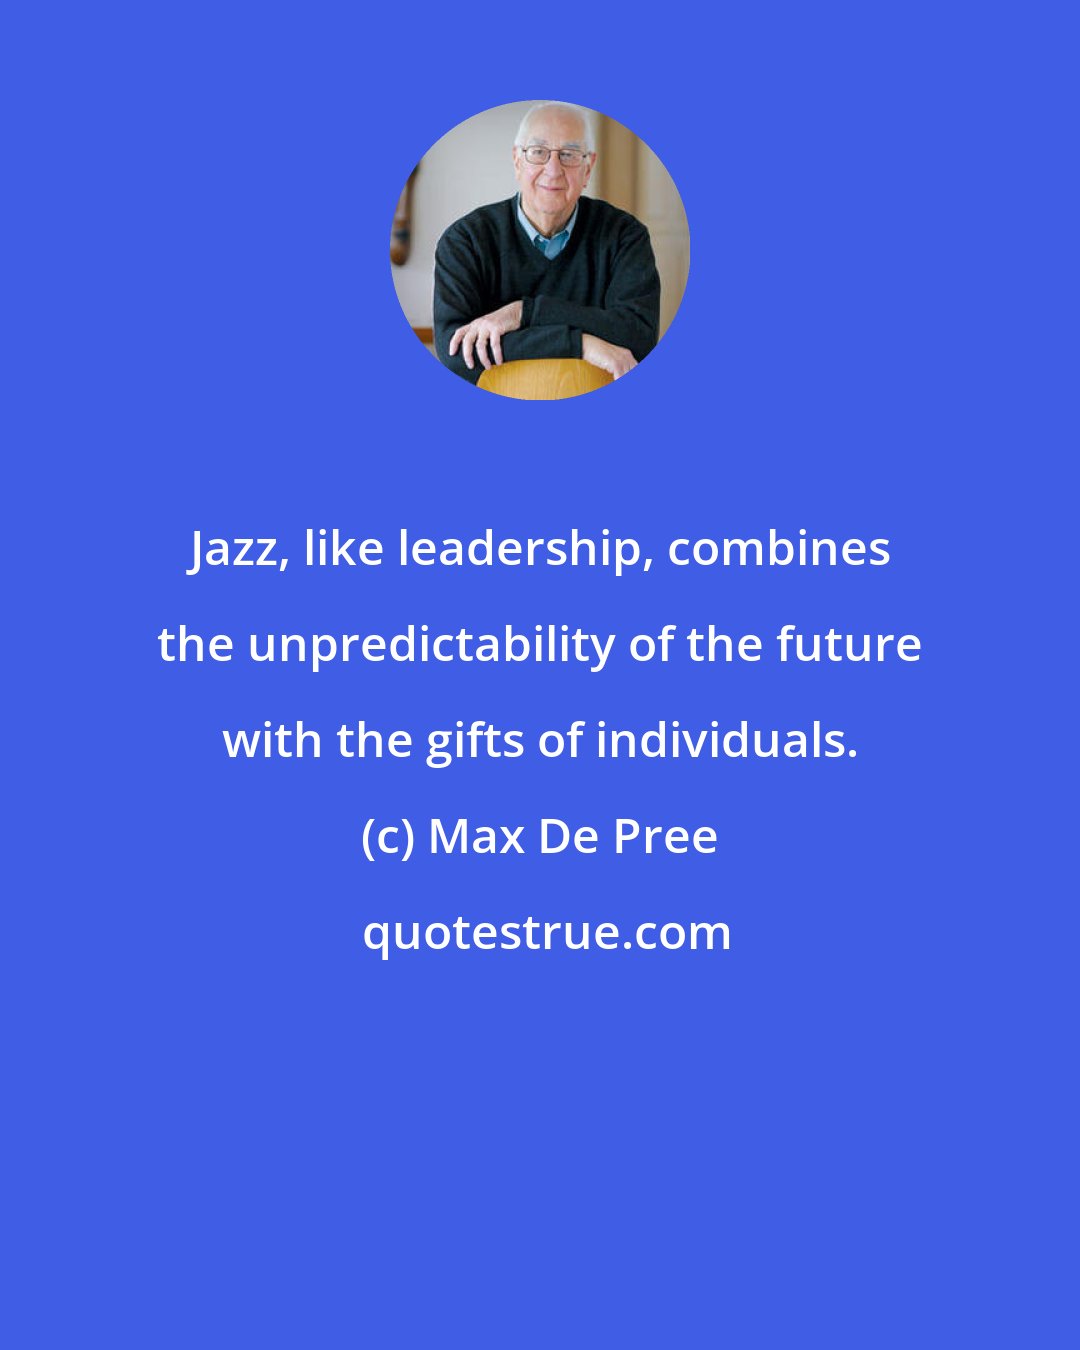 Max De Pree: Jazz, like leadership, combines the unpredictability of the future with the gifts of individuals.